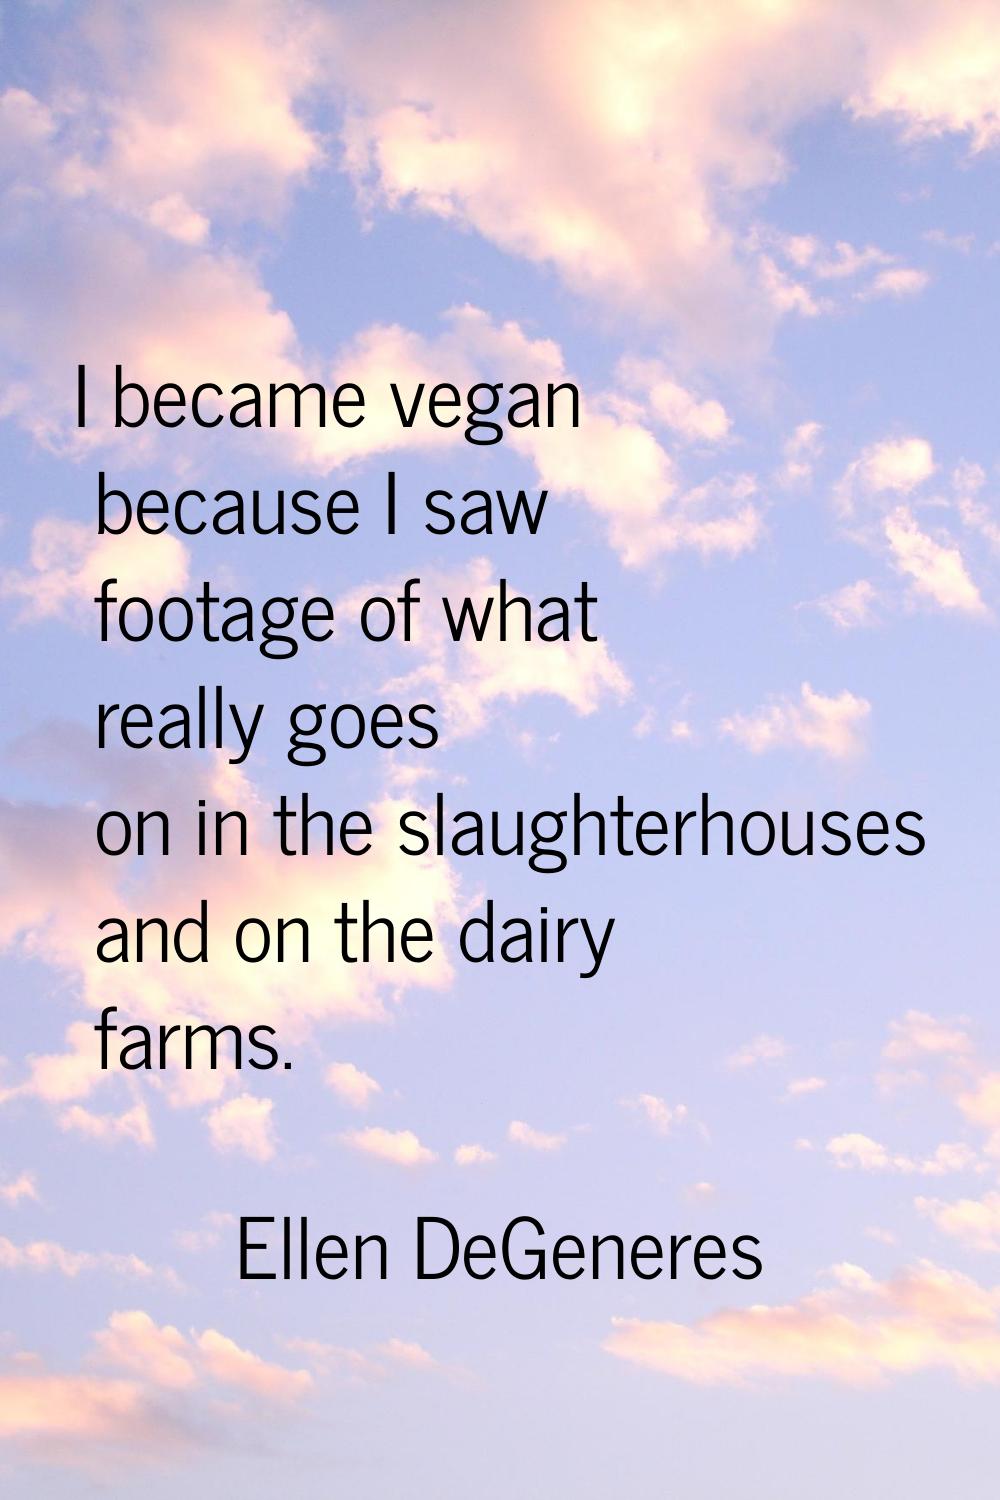 I became vegan because I saw footage of what really goes on in the slaughterhouses and on the dairy